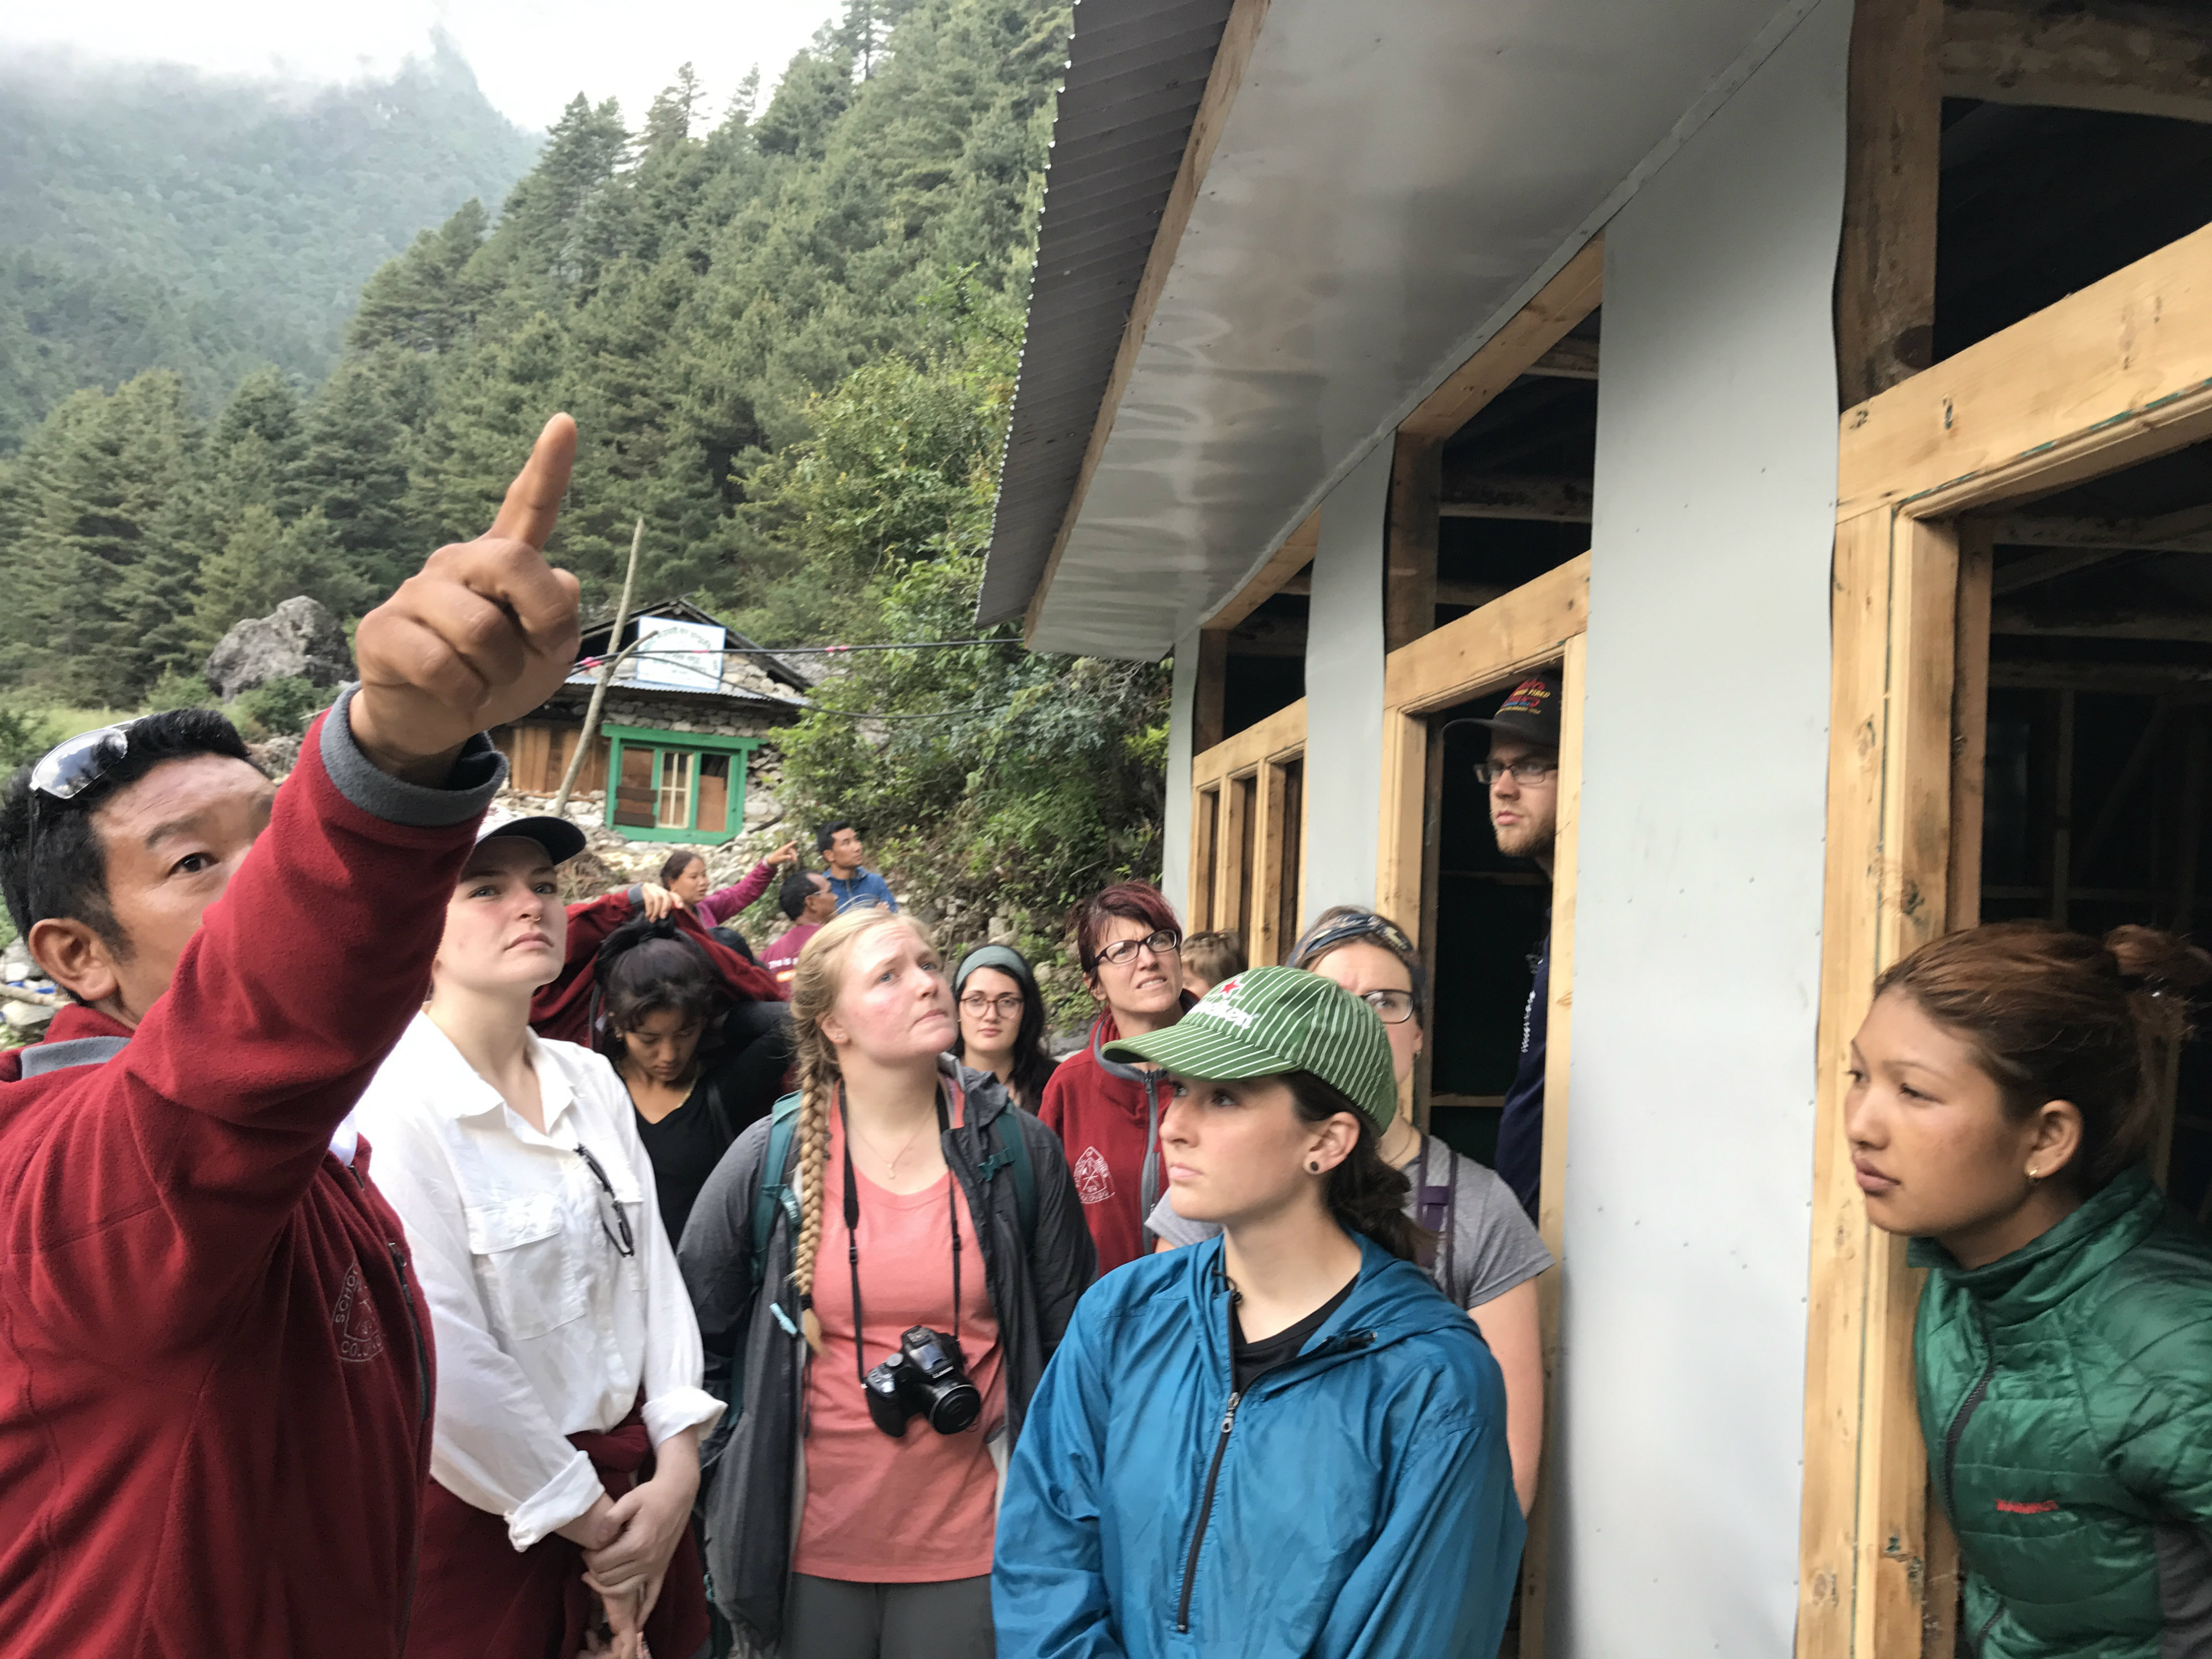 Lhakpa Sherpa, founder of Hike for Help, explains to Mines students the construction of Hike for Help's workshop for the Dalit to produce and sell their handicrafts .